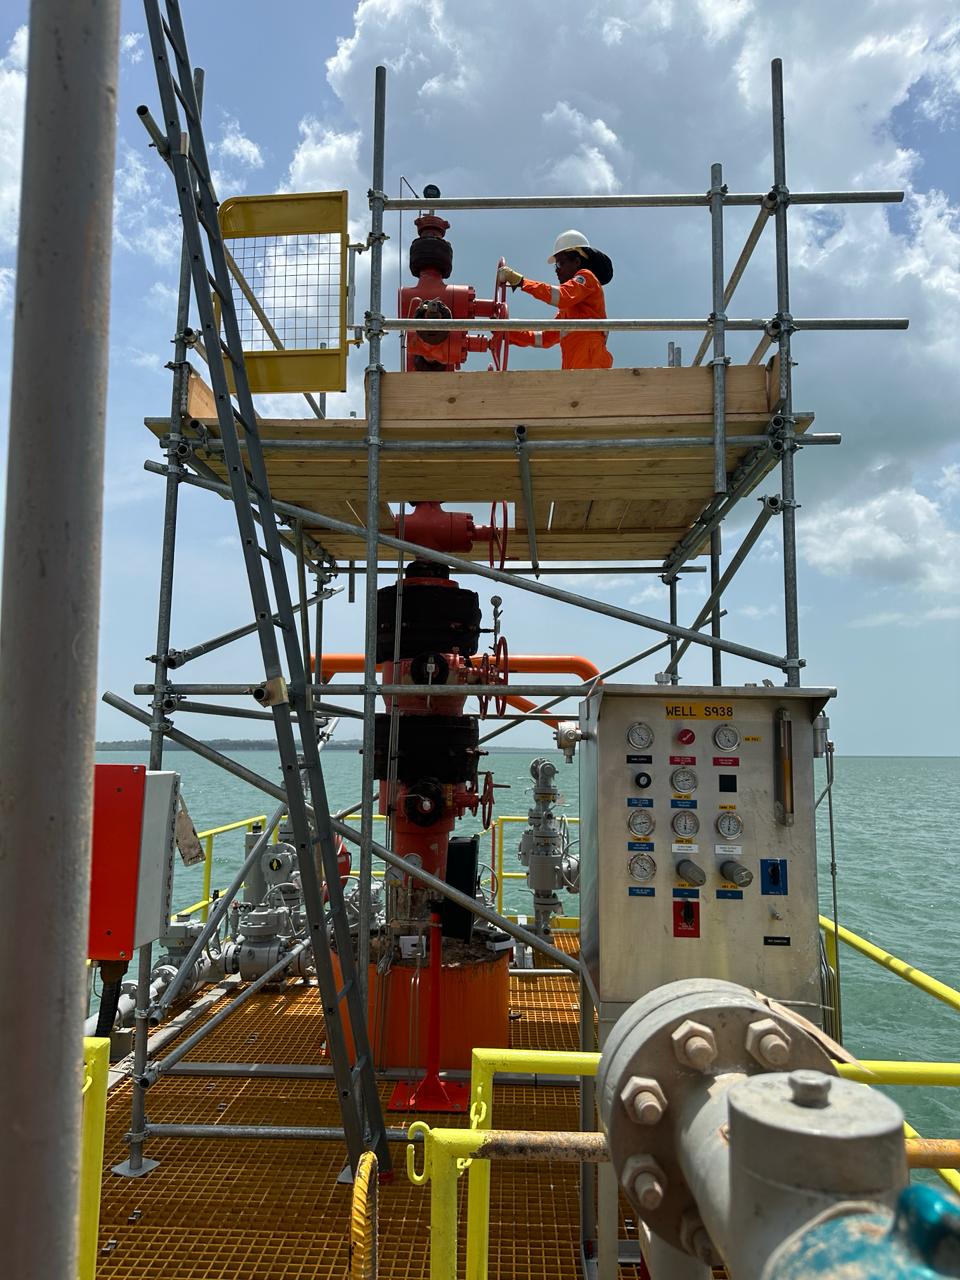 Maintenance checks on recently commissioned S-938 well; Source: Heritage